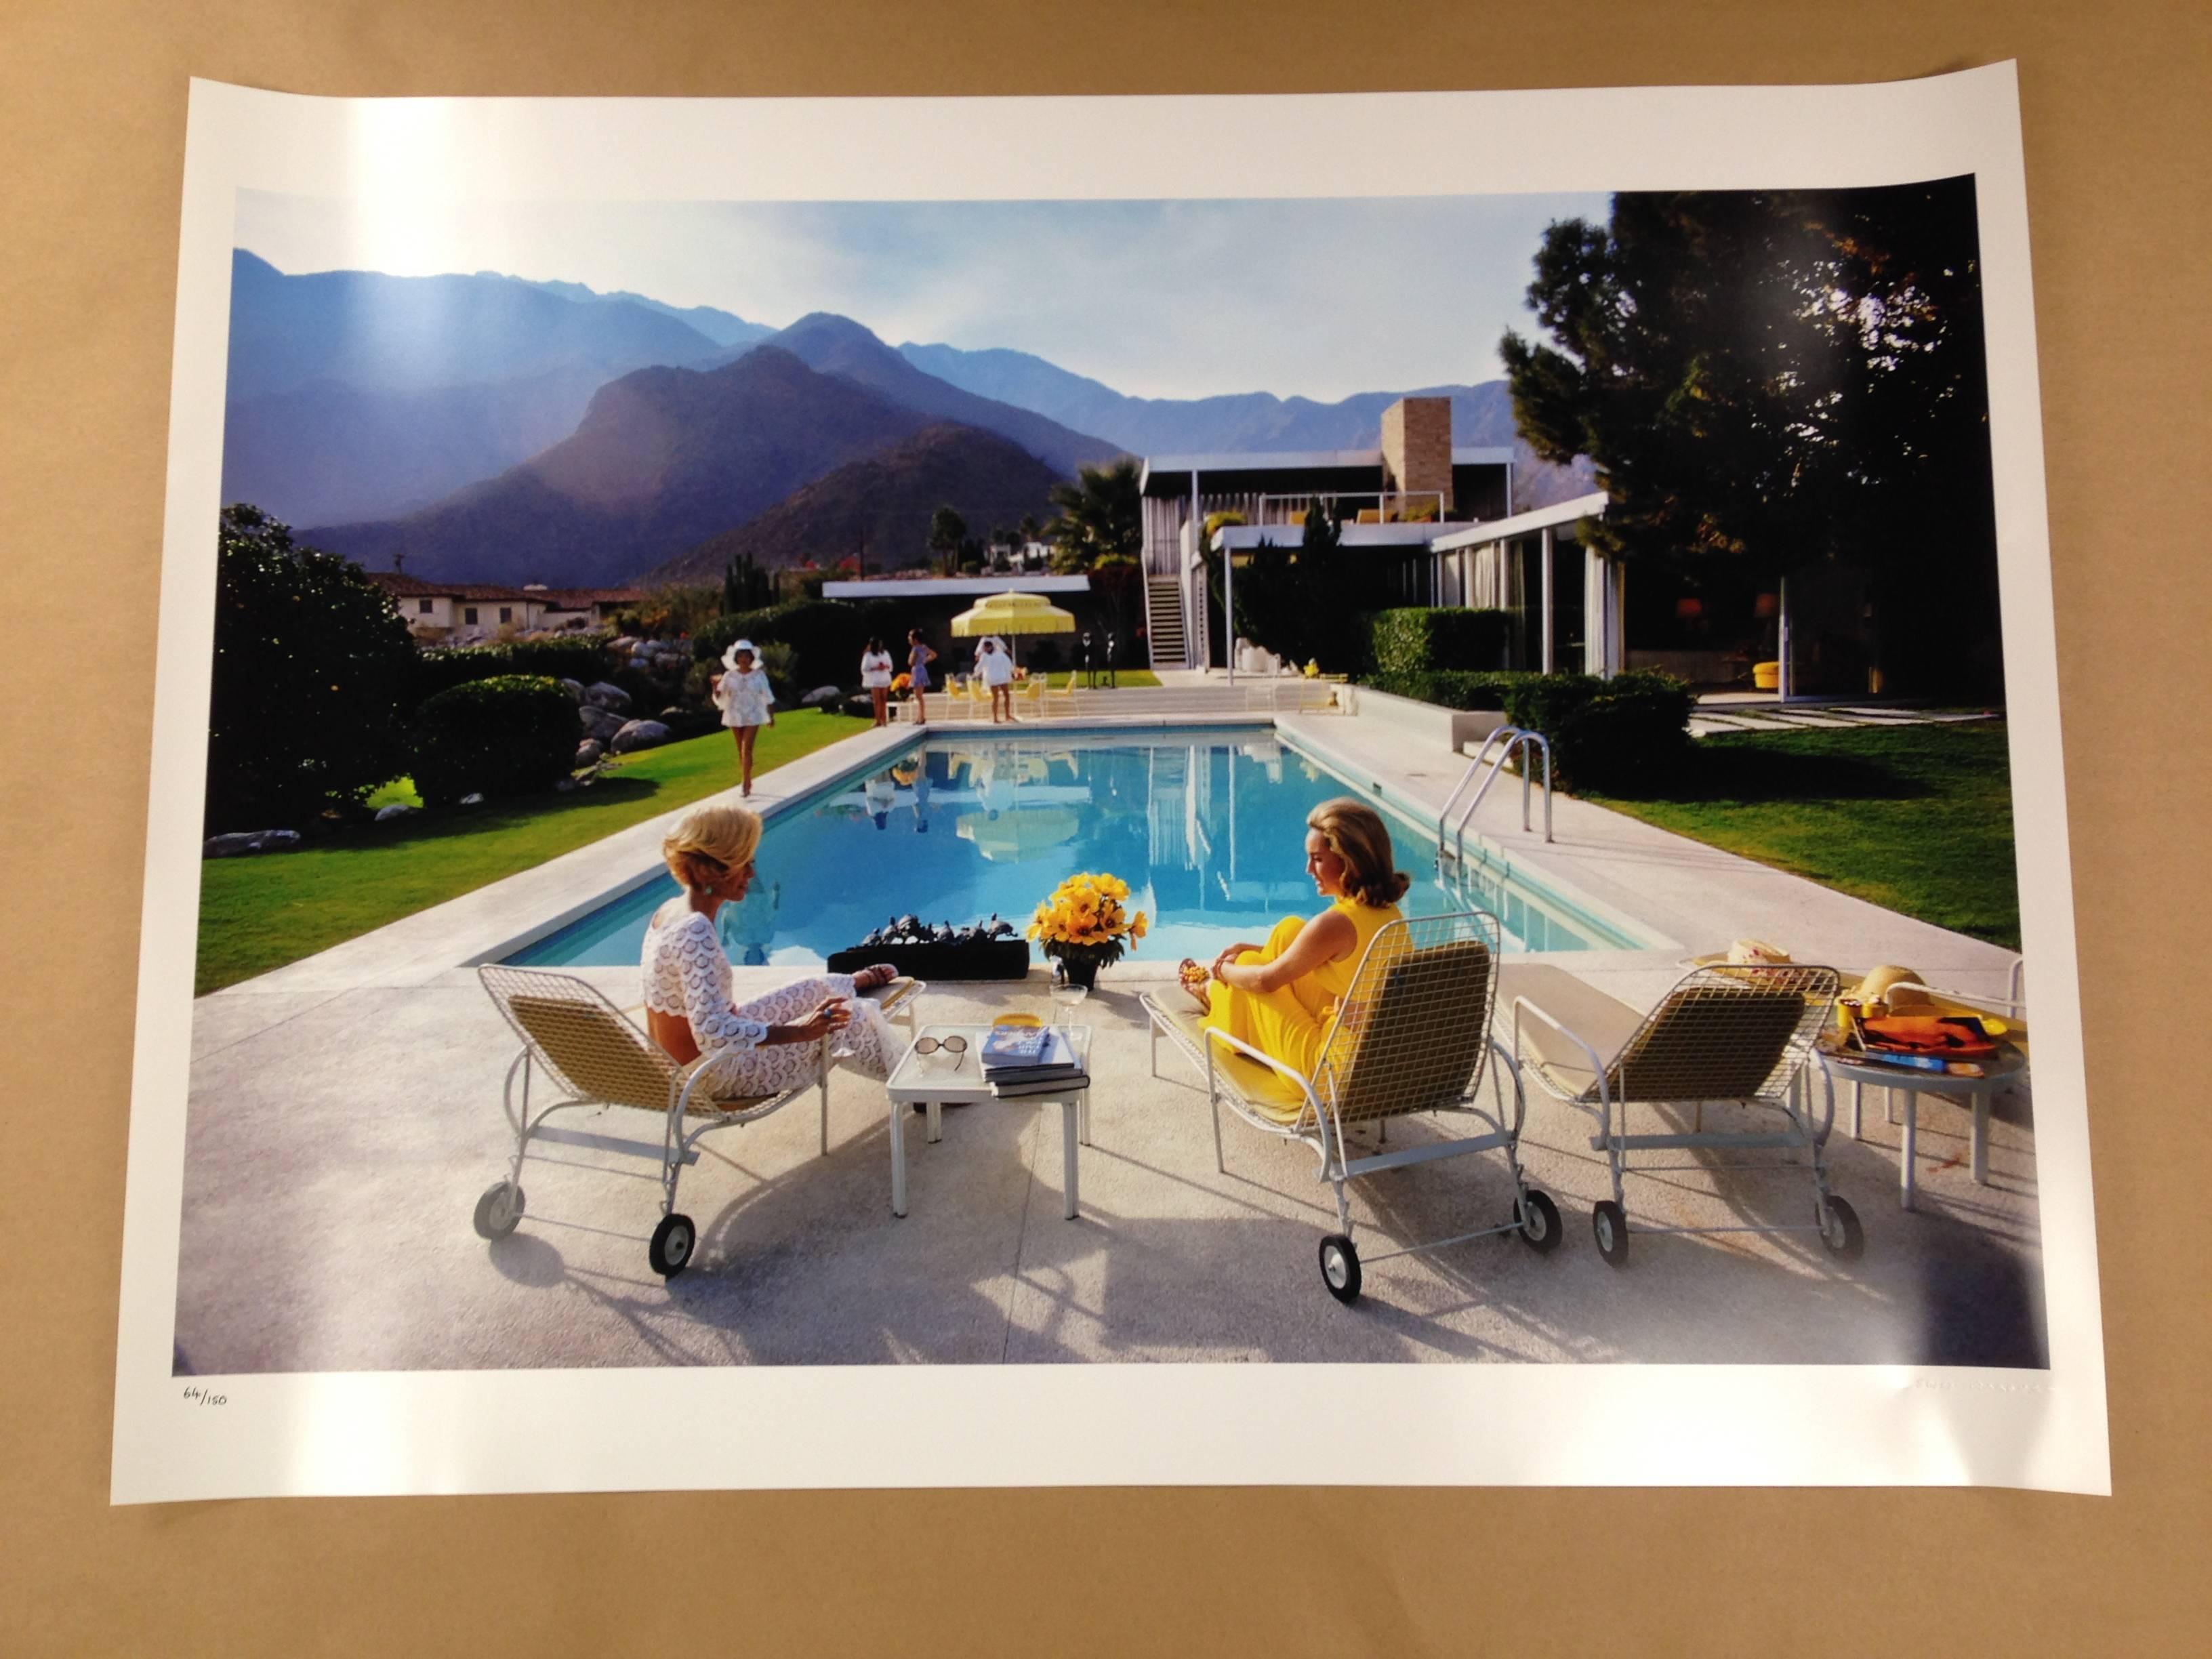 Poolside at Sotogrande (Estate Edition, Free Shipping) - Realist Photograph by Slim Aarons